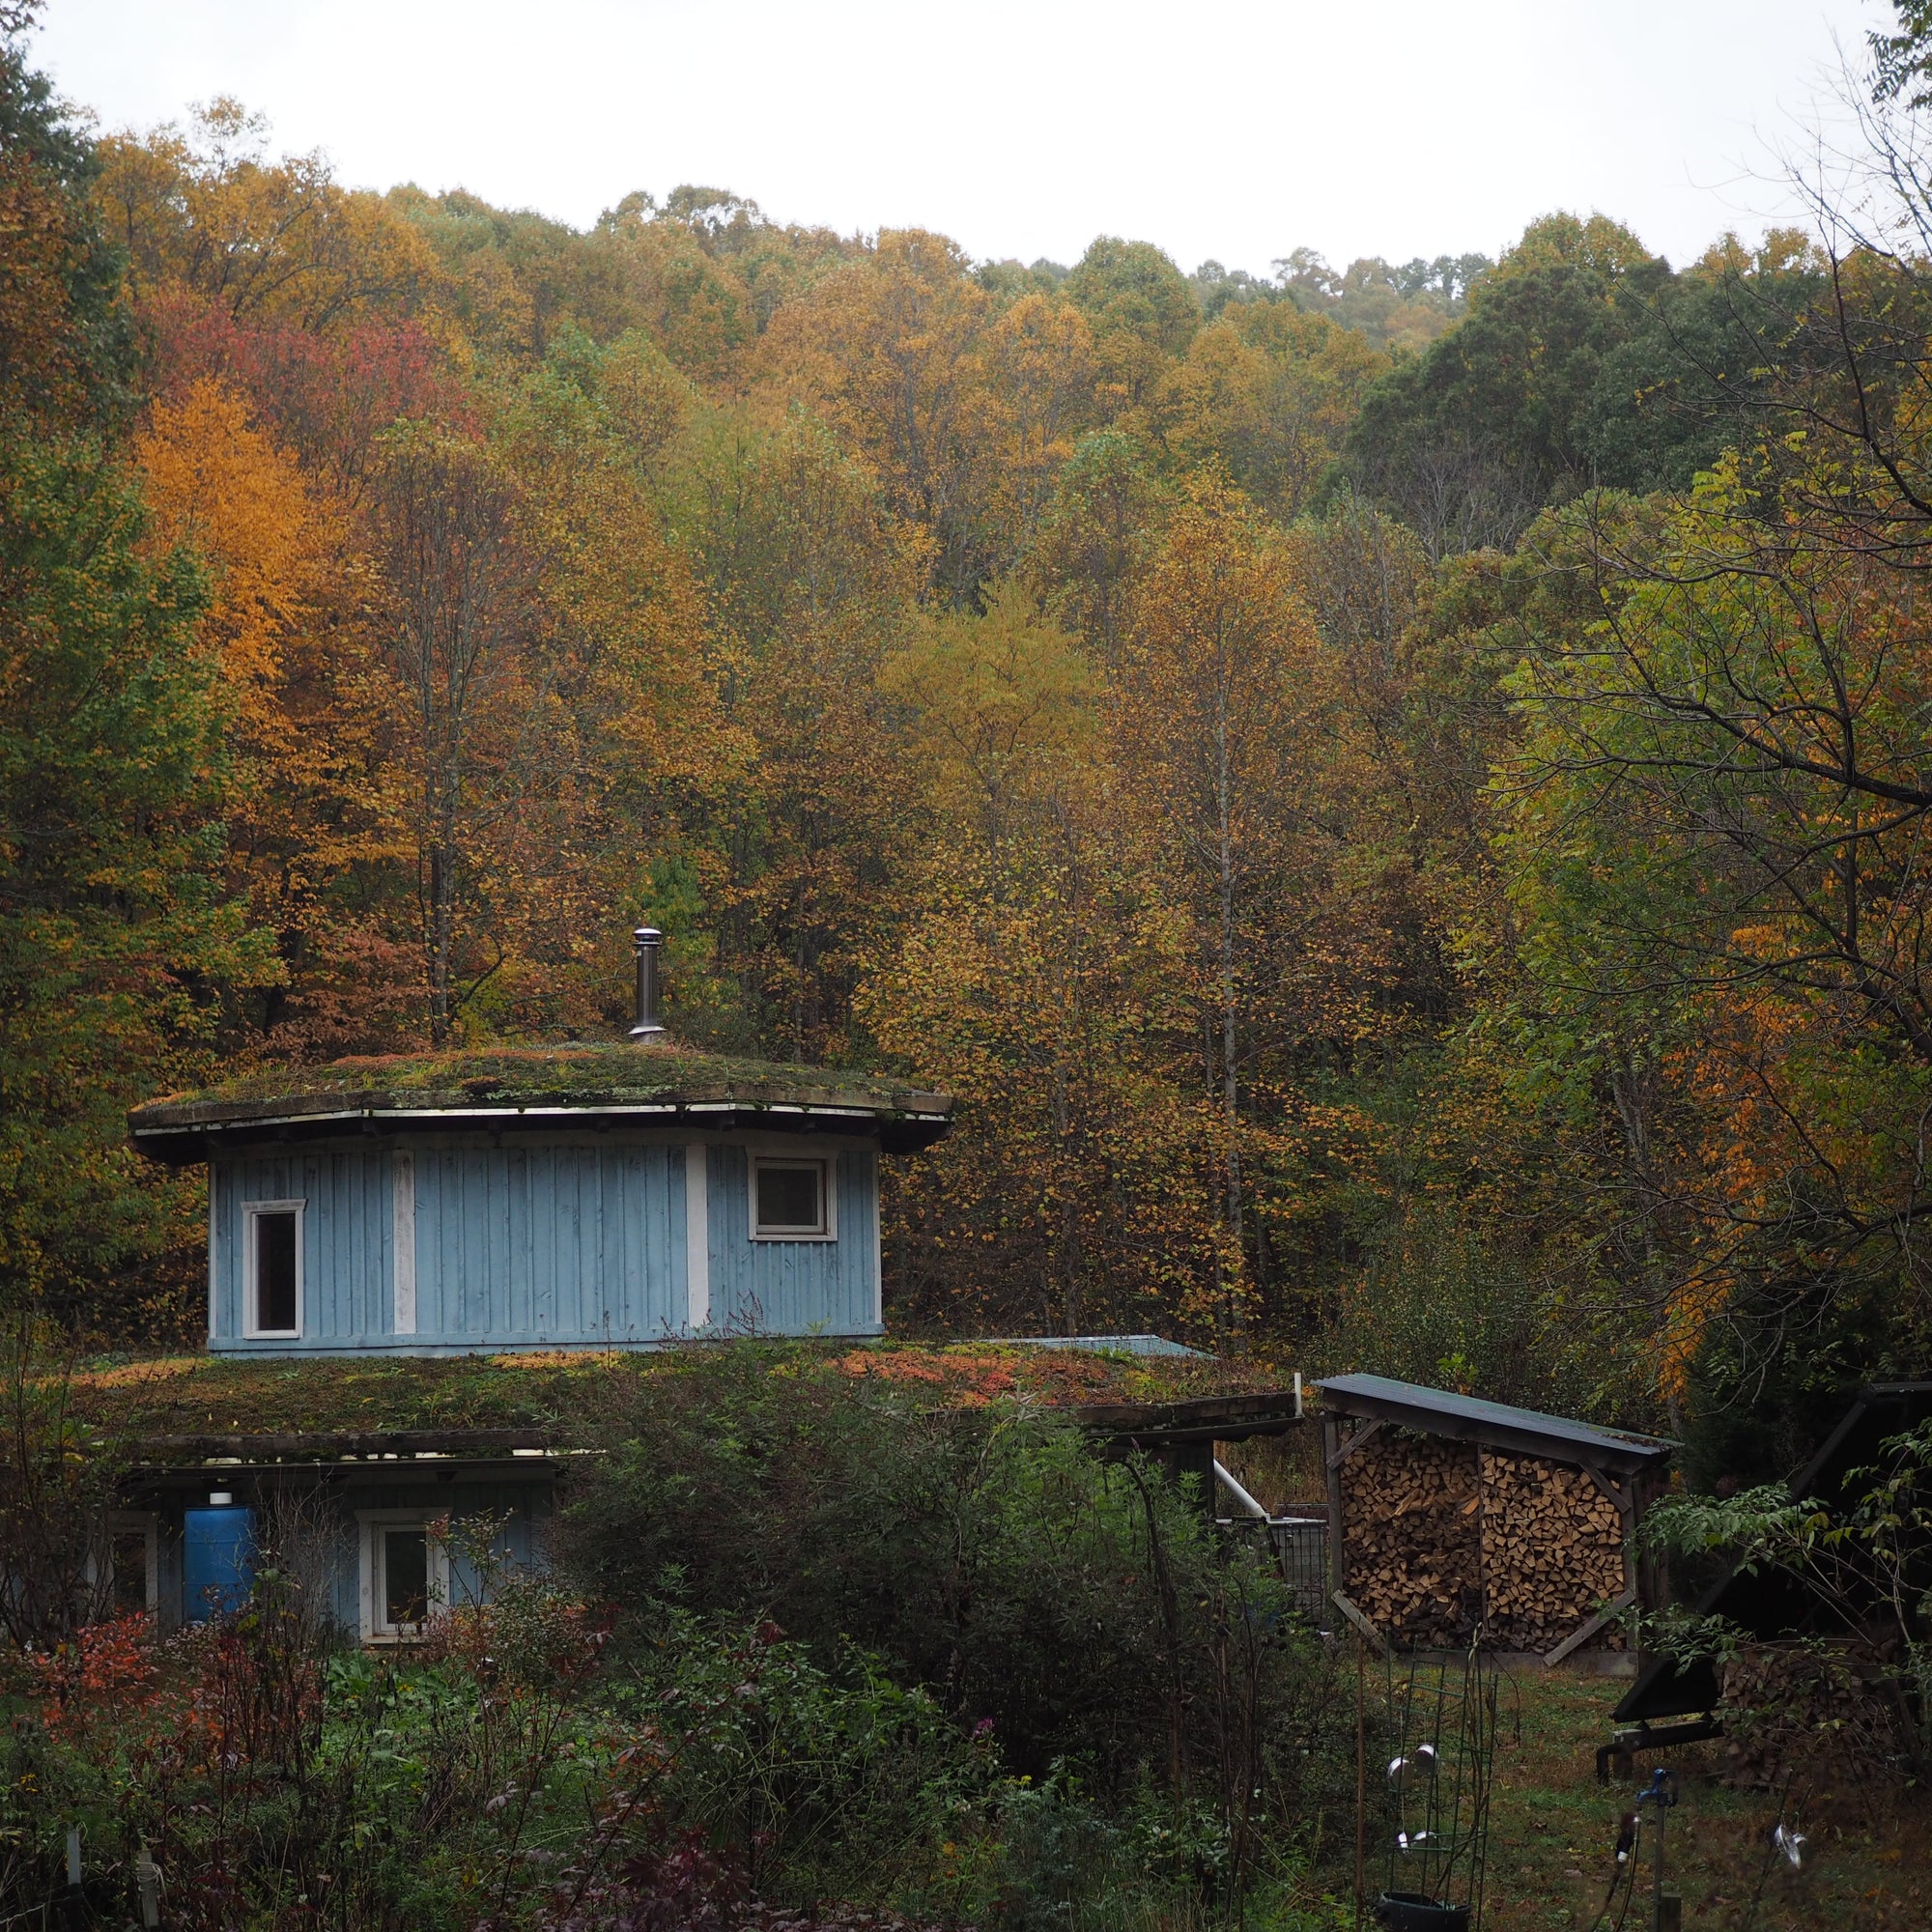 A round, blue house with colorful plants on the roof sits in a forest of tall trees displaying their fall foliage